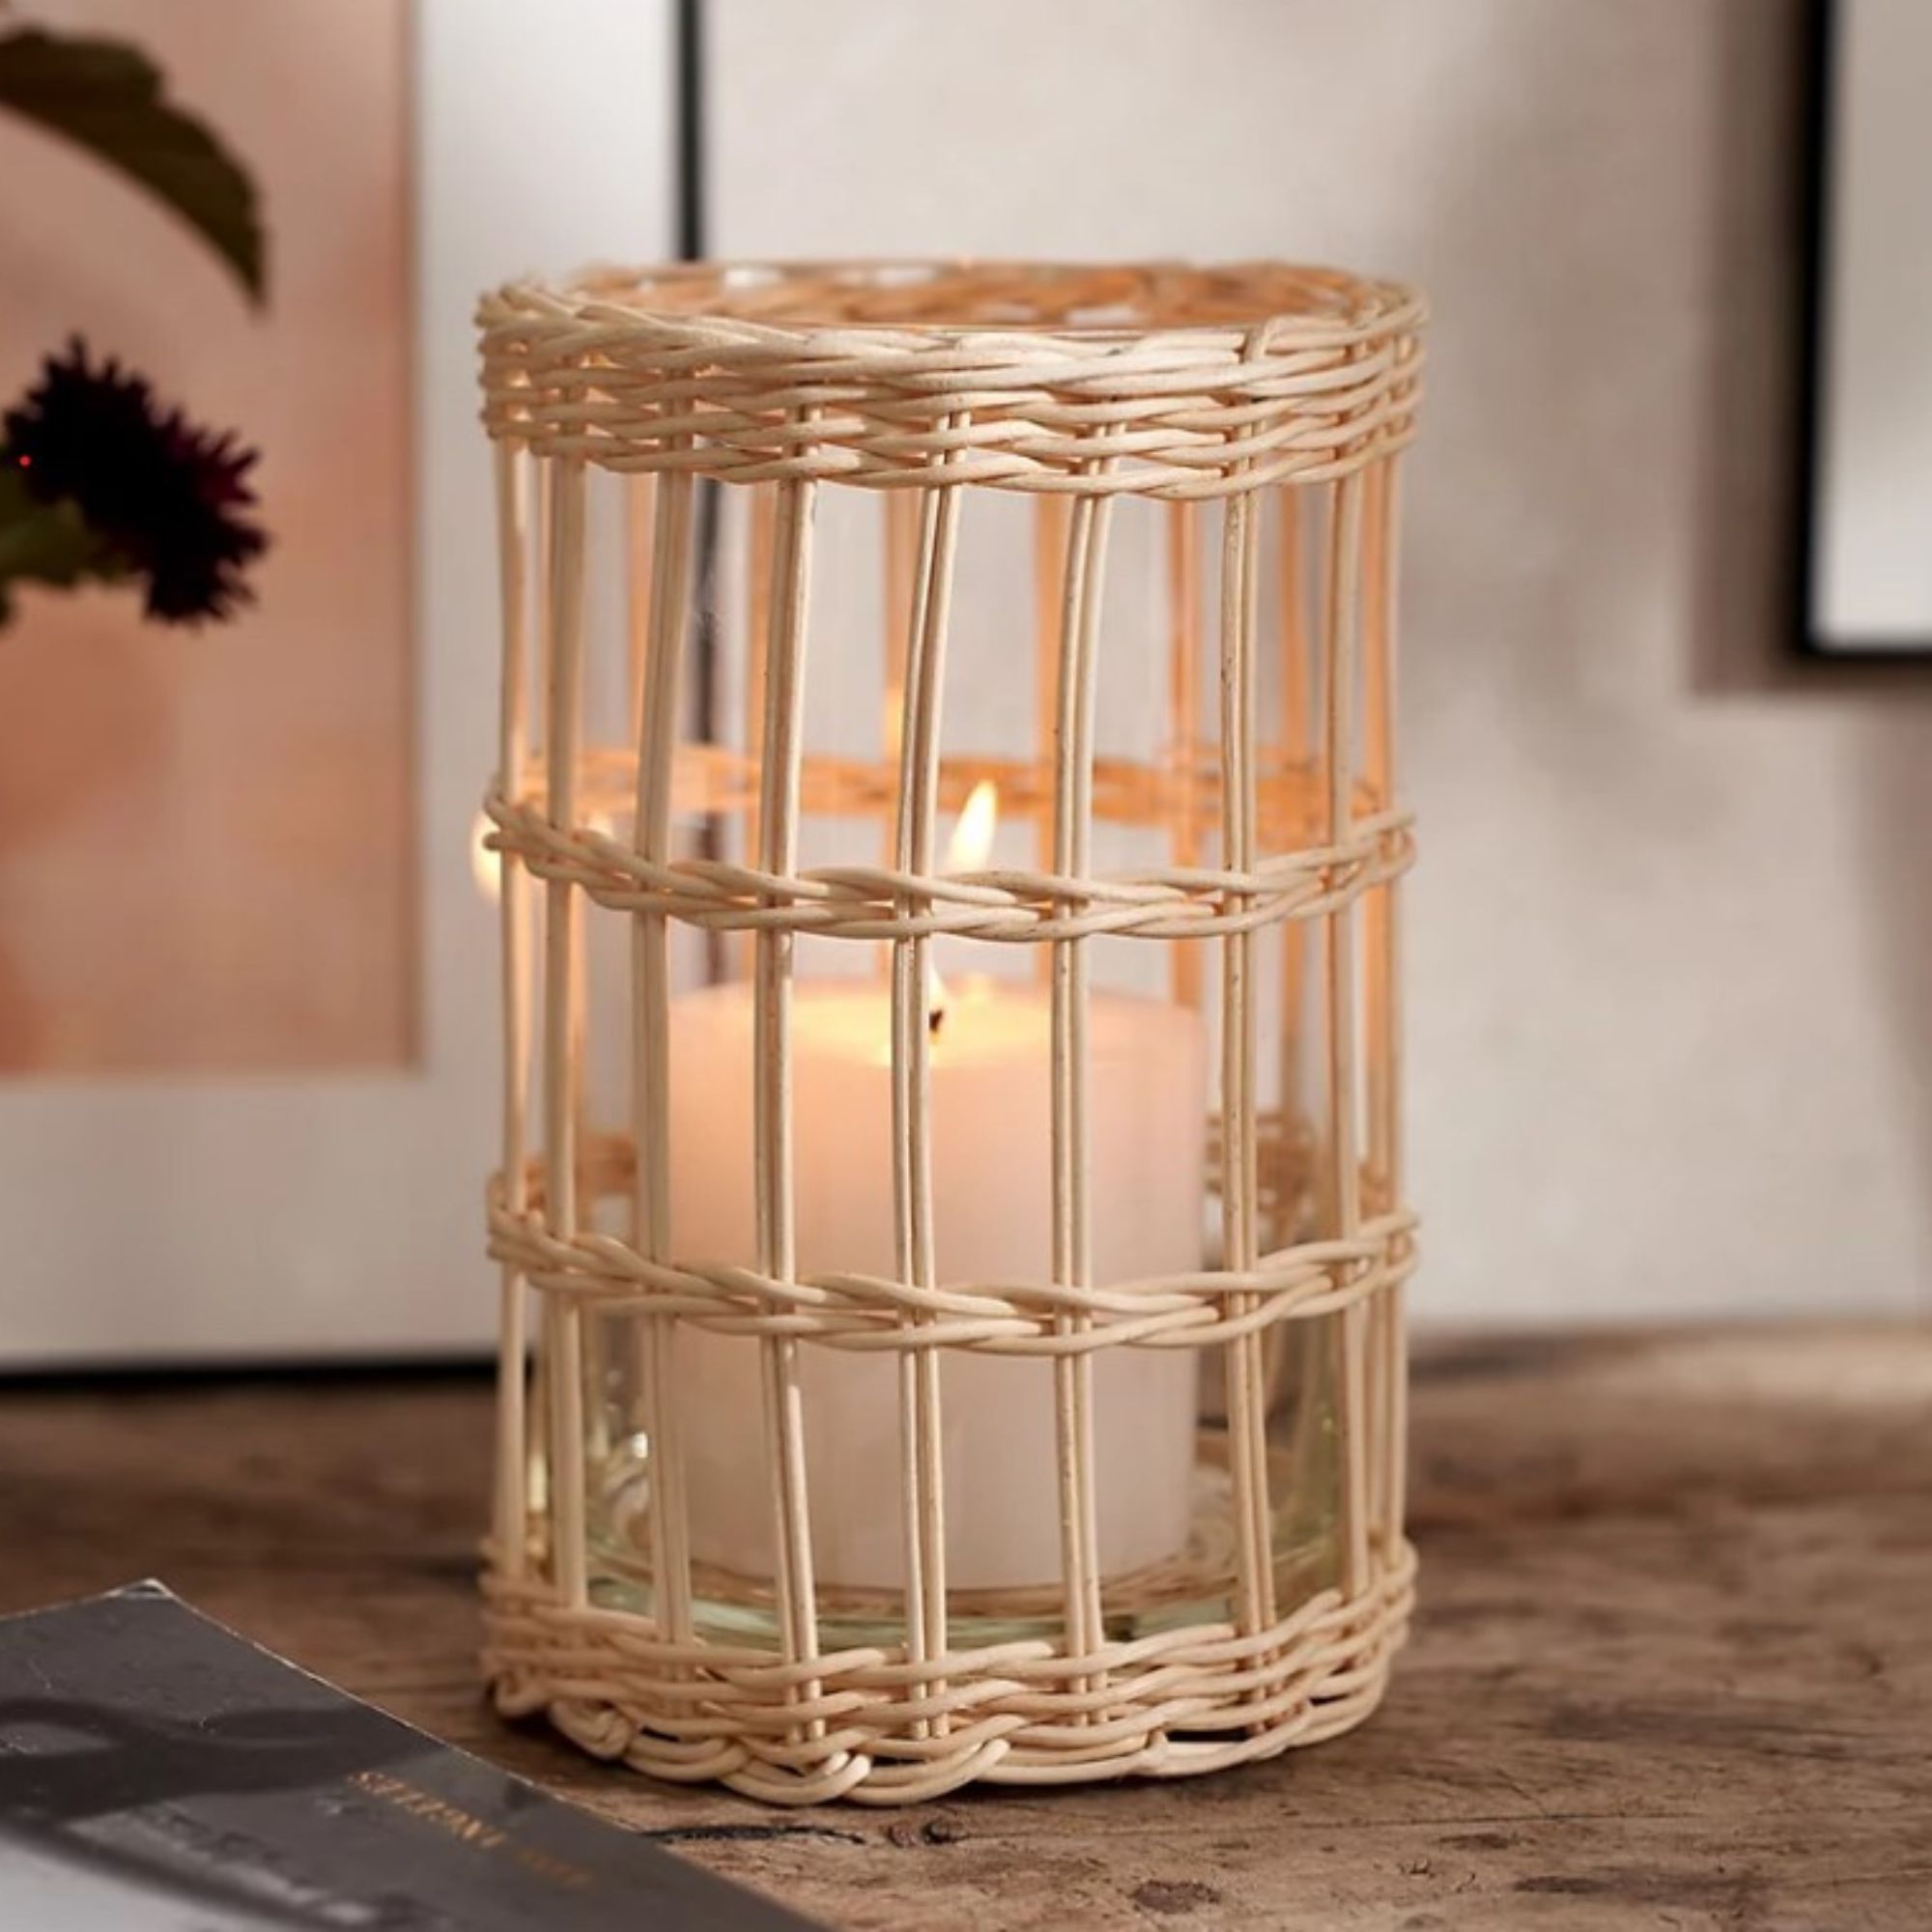 Rattan candle holder from TWC 